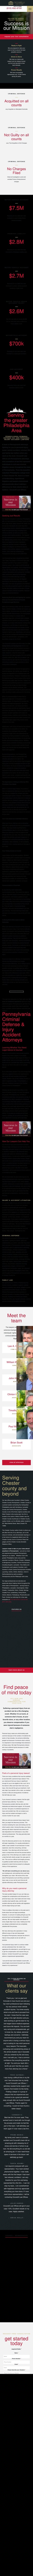 Ciccarelli Law Offices - Coatesville PA Lawyers